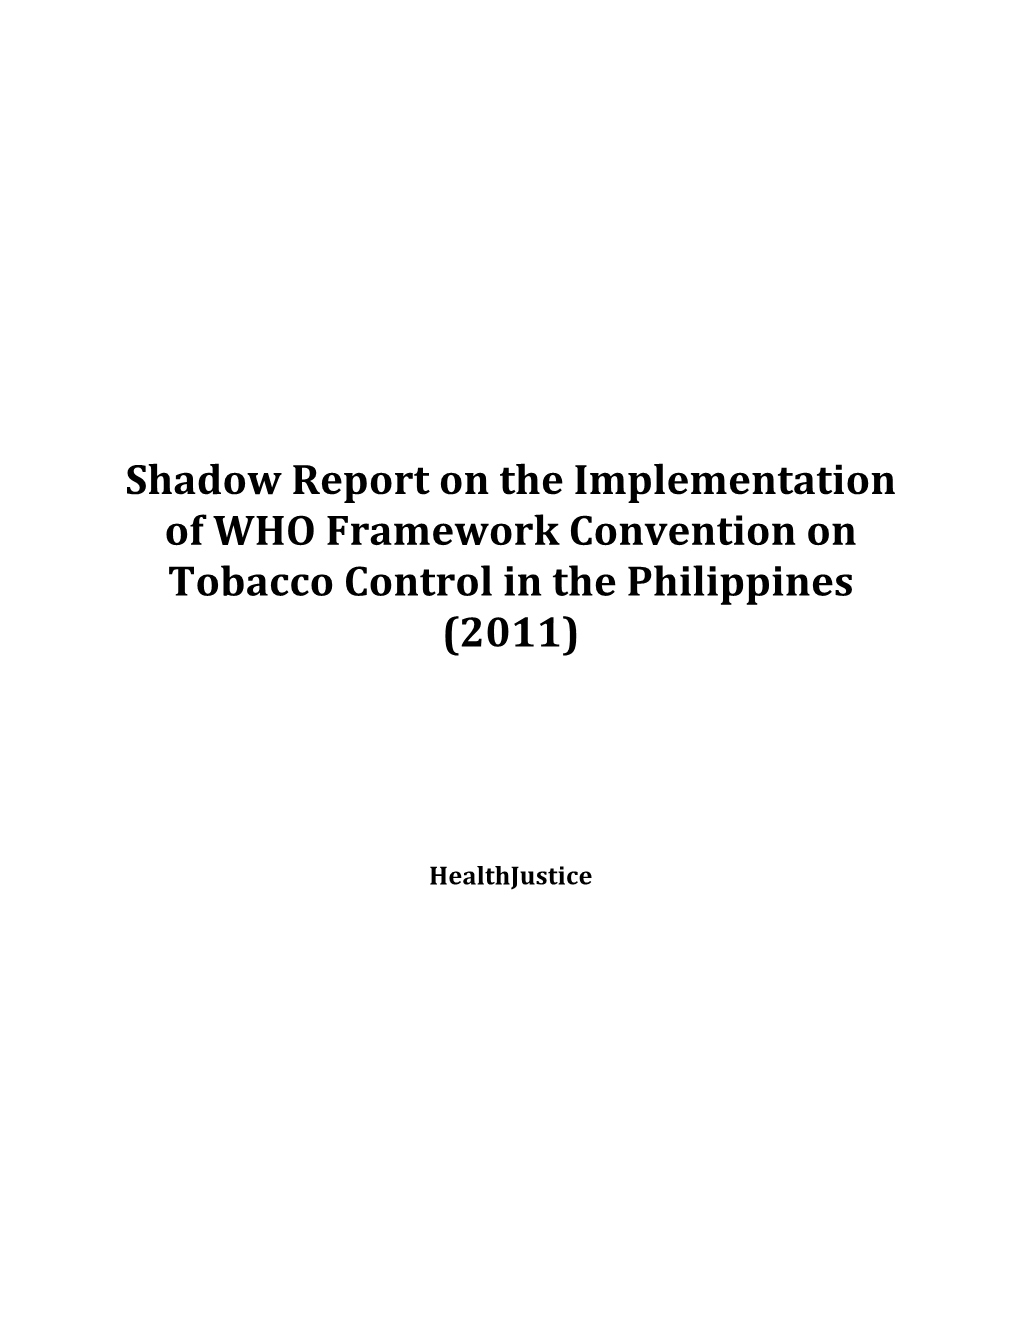 Shadow Report on the Implementation of WHO Framework Convention on Tobacco Control in the Philippines (2011)